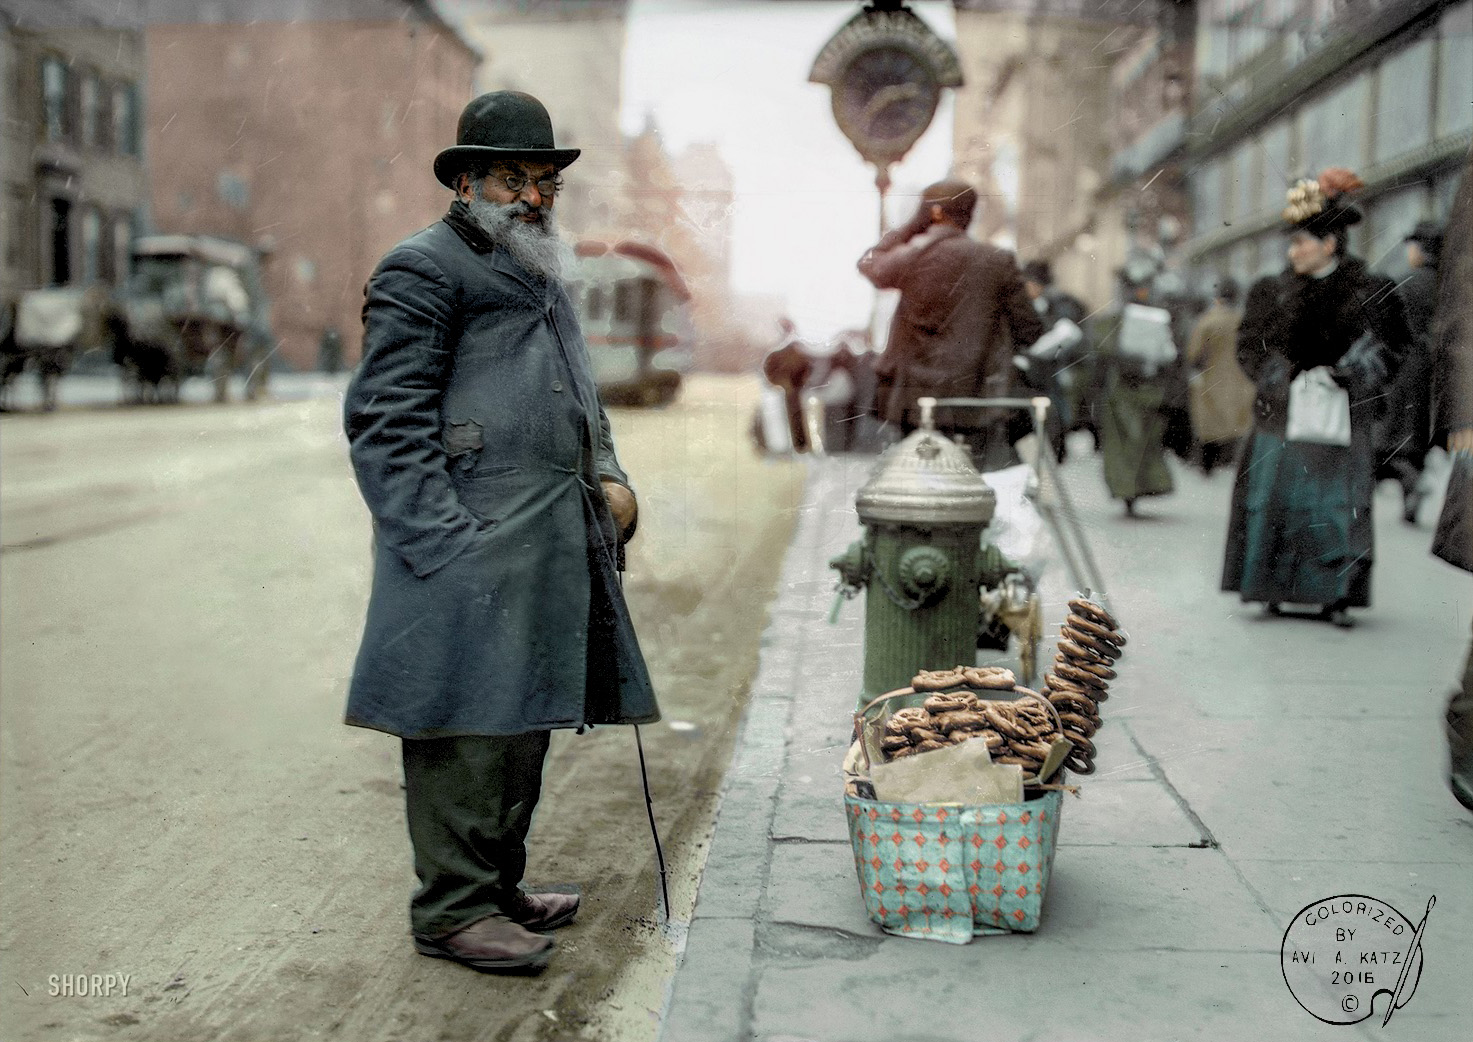 Colorized from this Shorpy original. I just love this simple moment frozen in time. View full size.